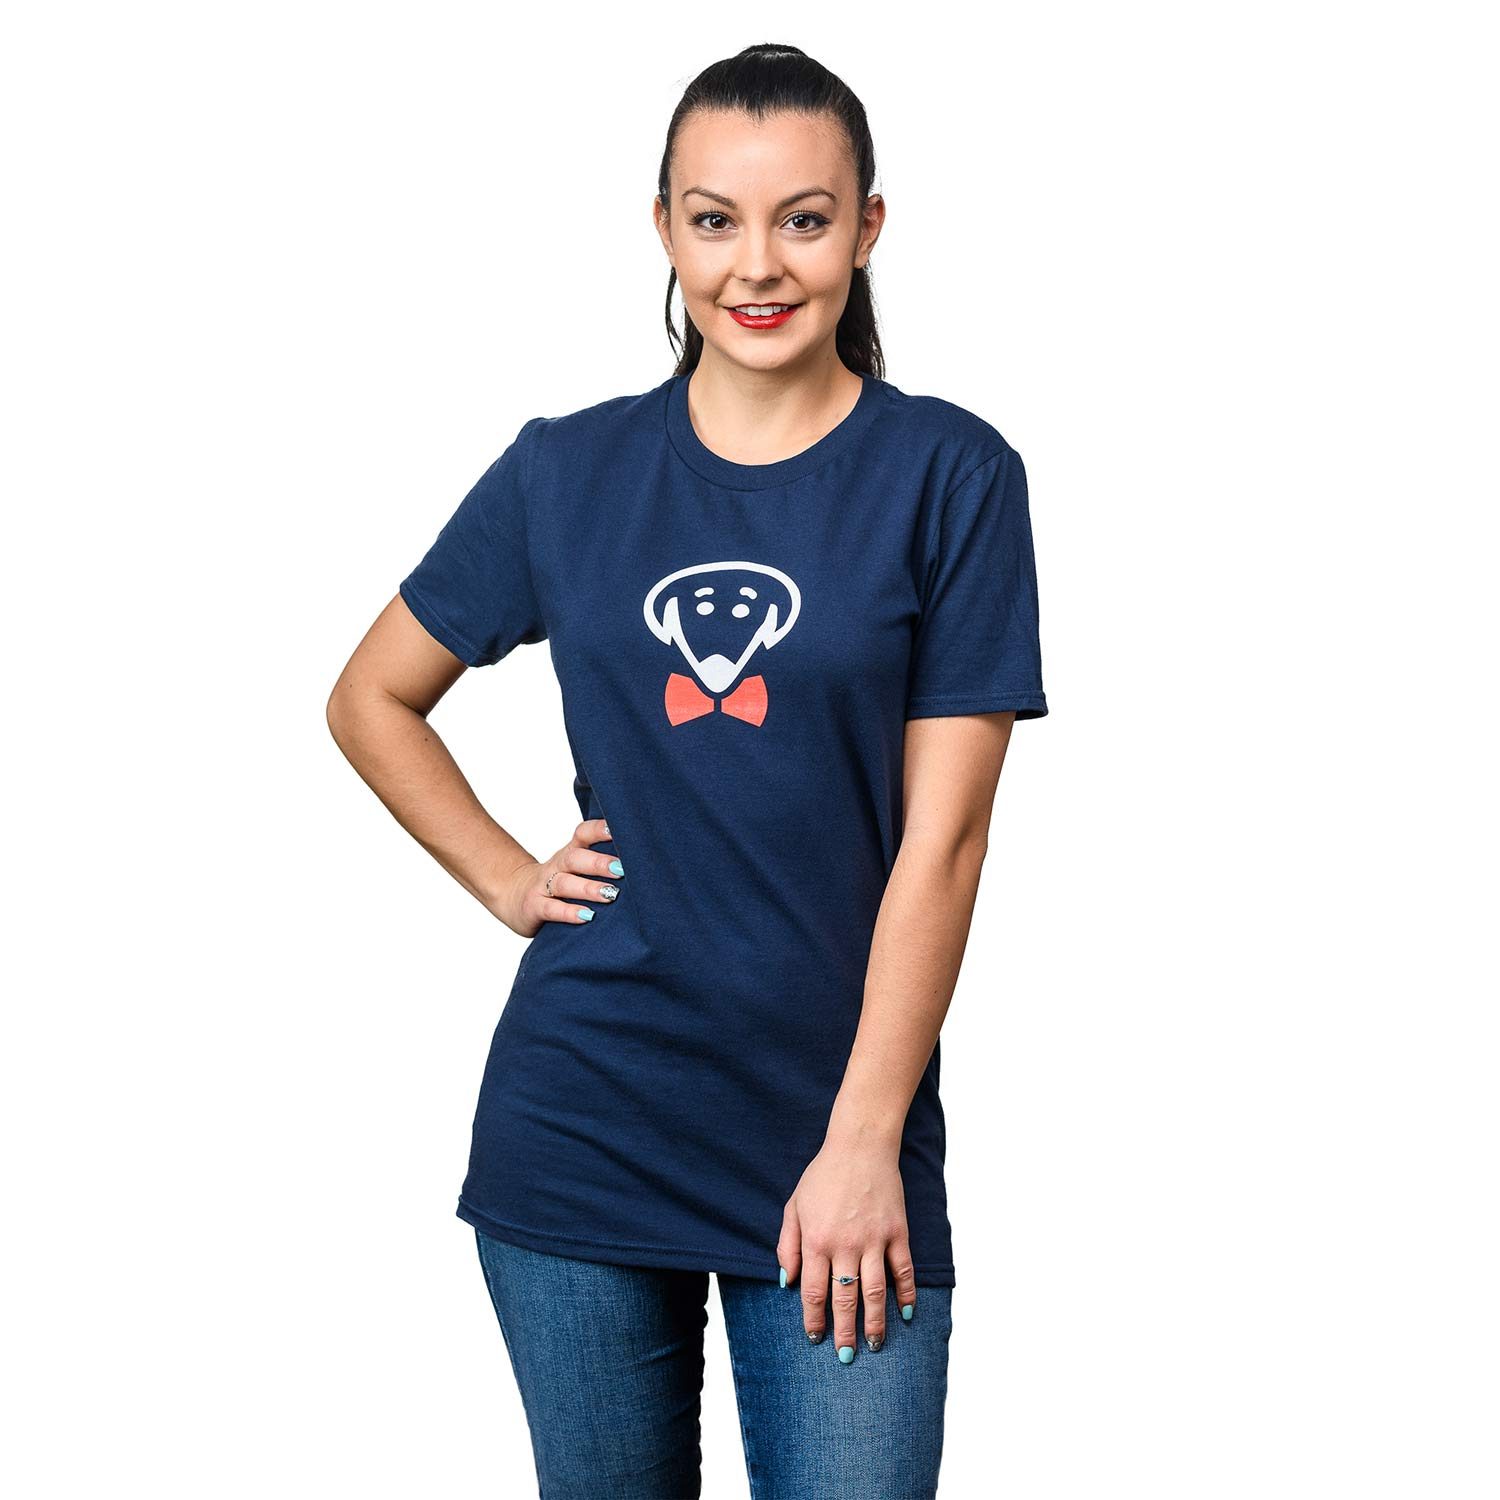 Signature t-shirt in navy by Beau Tyler